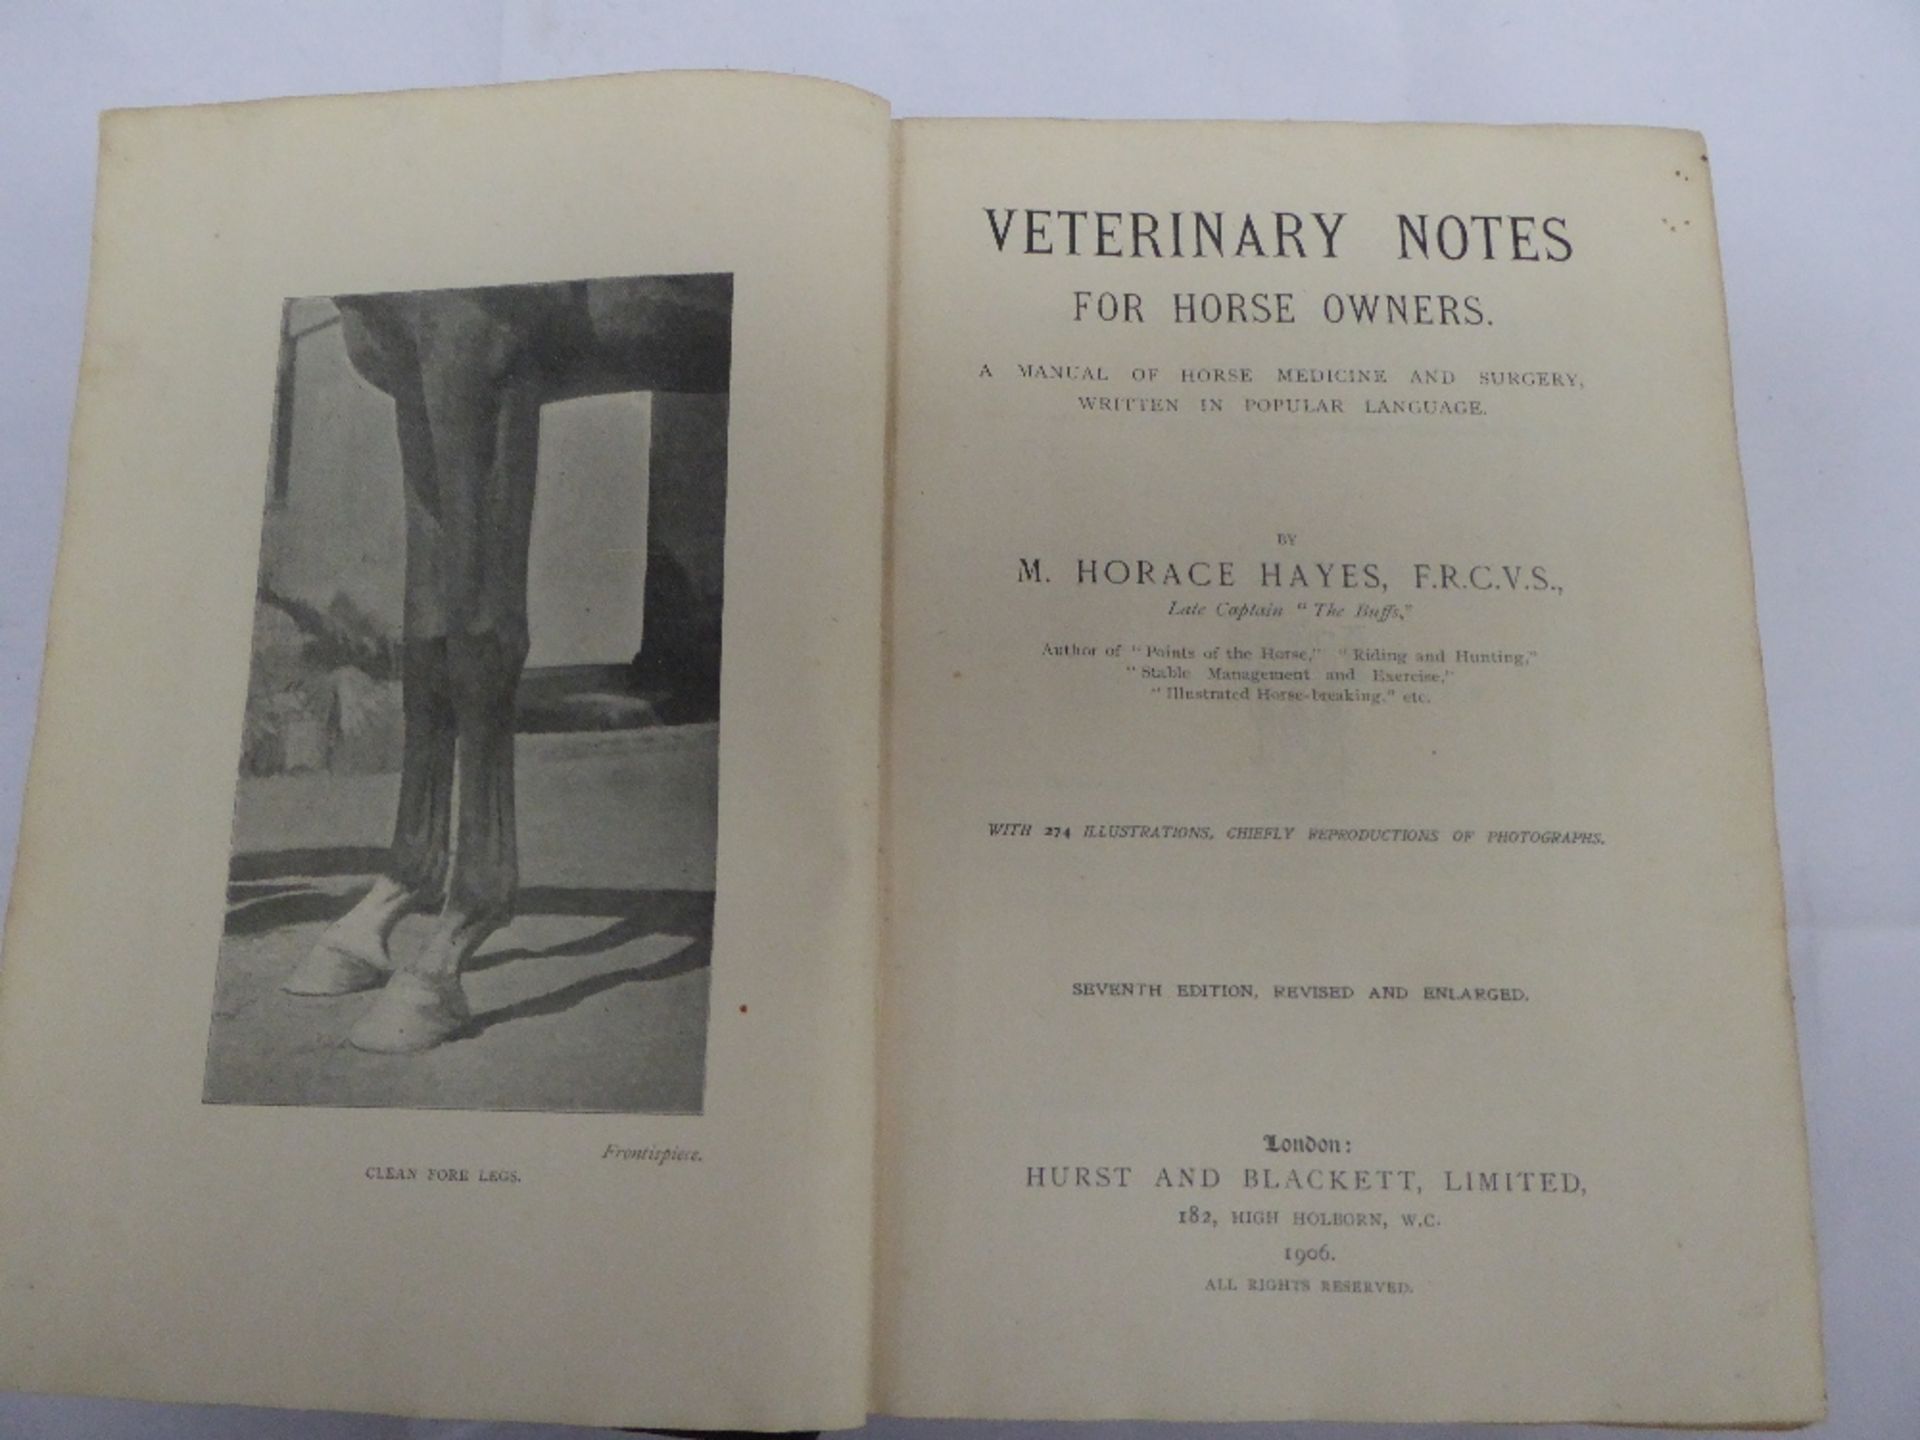 An old Vet's book entitled "Veterinary Notes for Horse Owners", 7th Edition, 1906 - Image 2 of 2